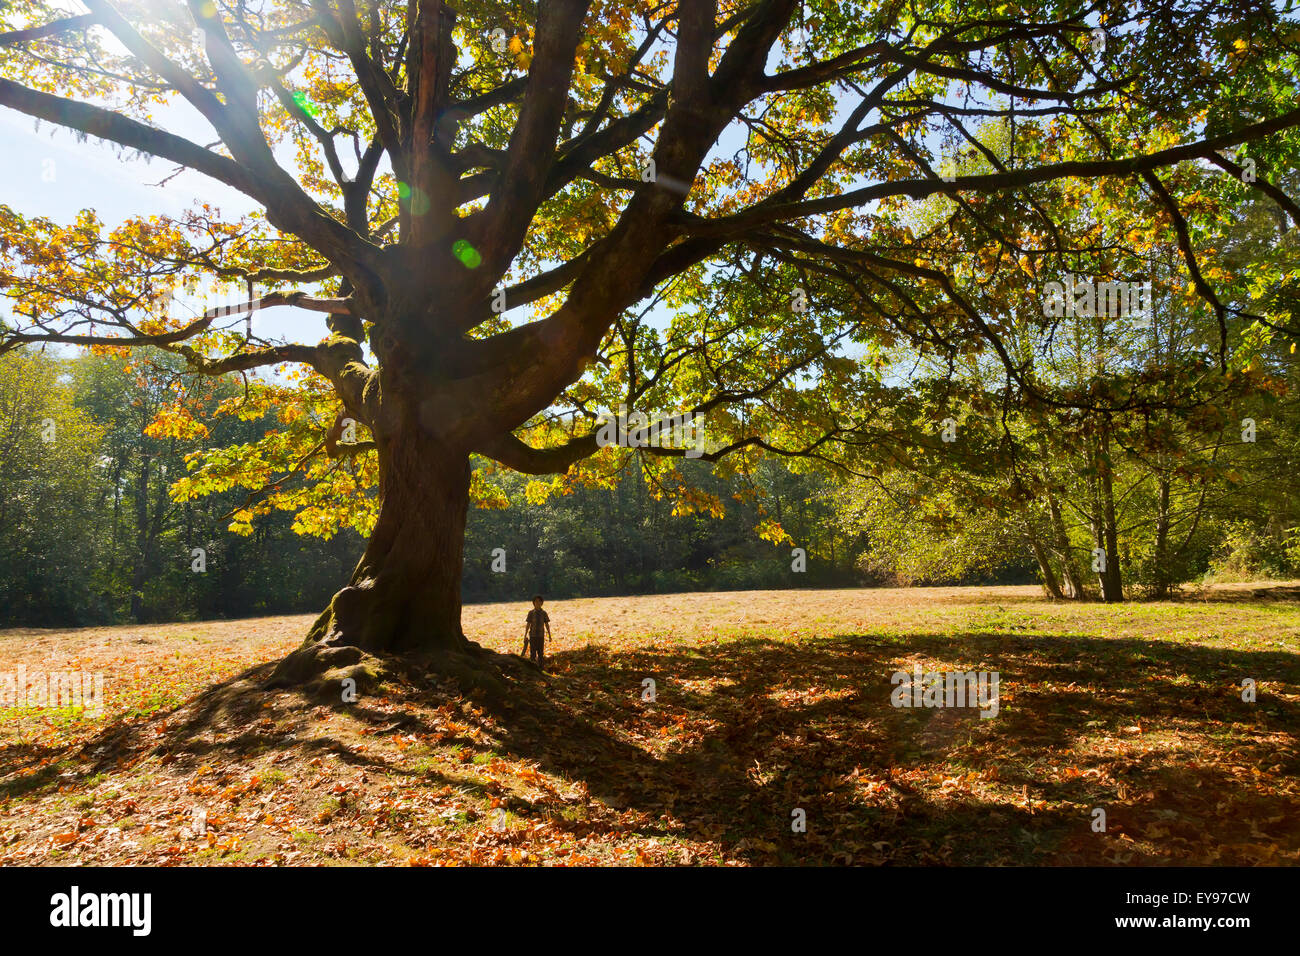 young-boy-exploring-under-oak-tree-in-a-